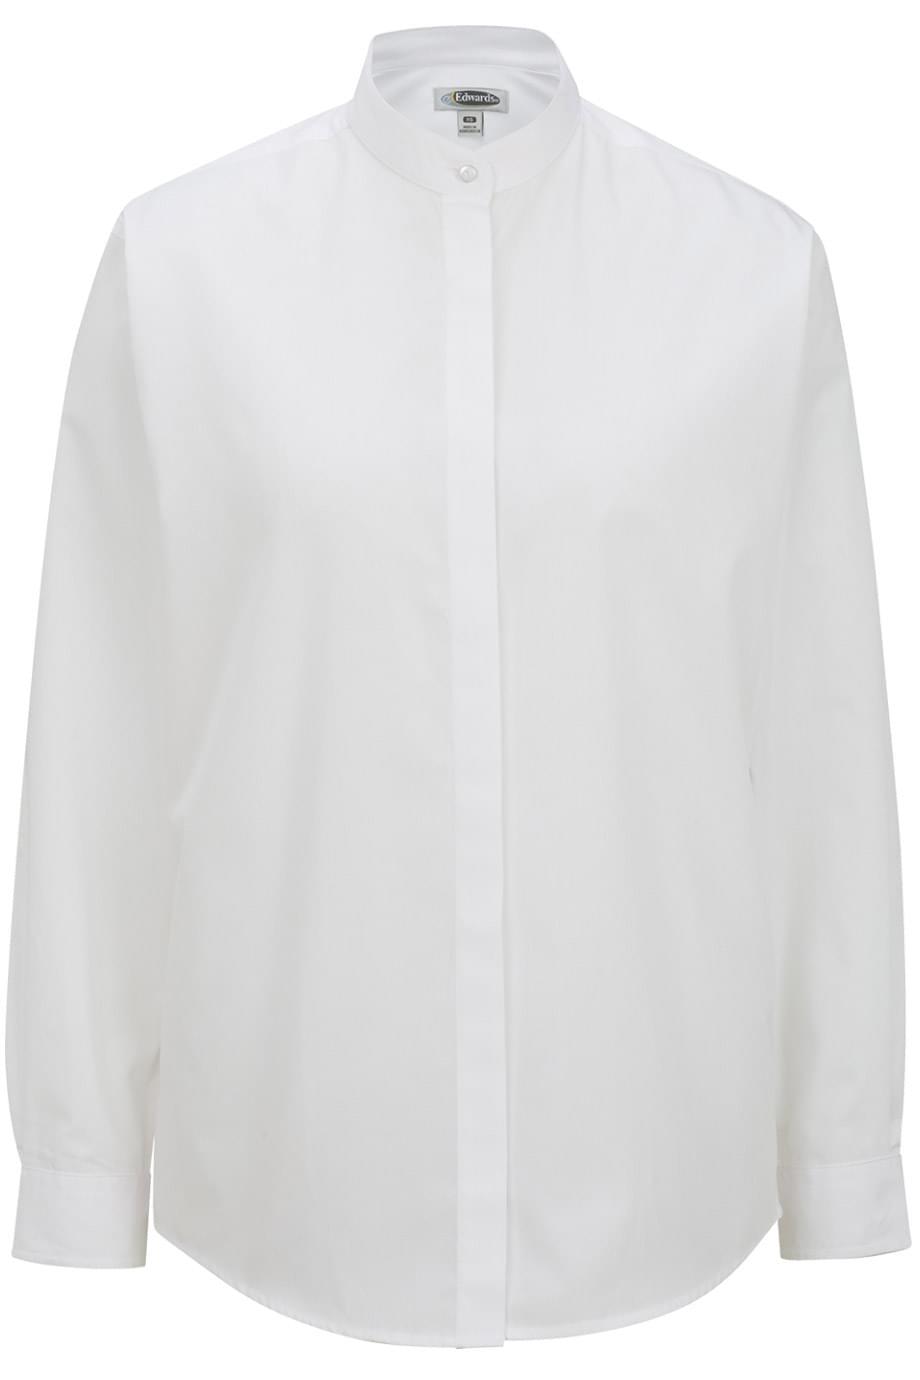 EDWARDS LADIES’ BANDED COLLAR SHIRT | Uniforms Today